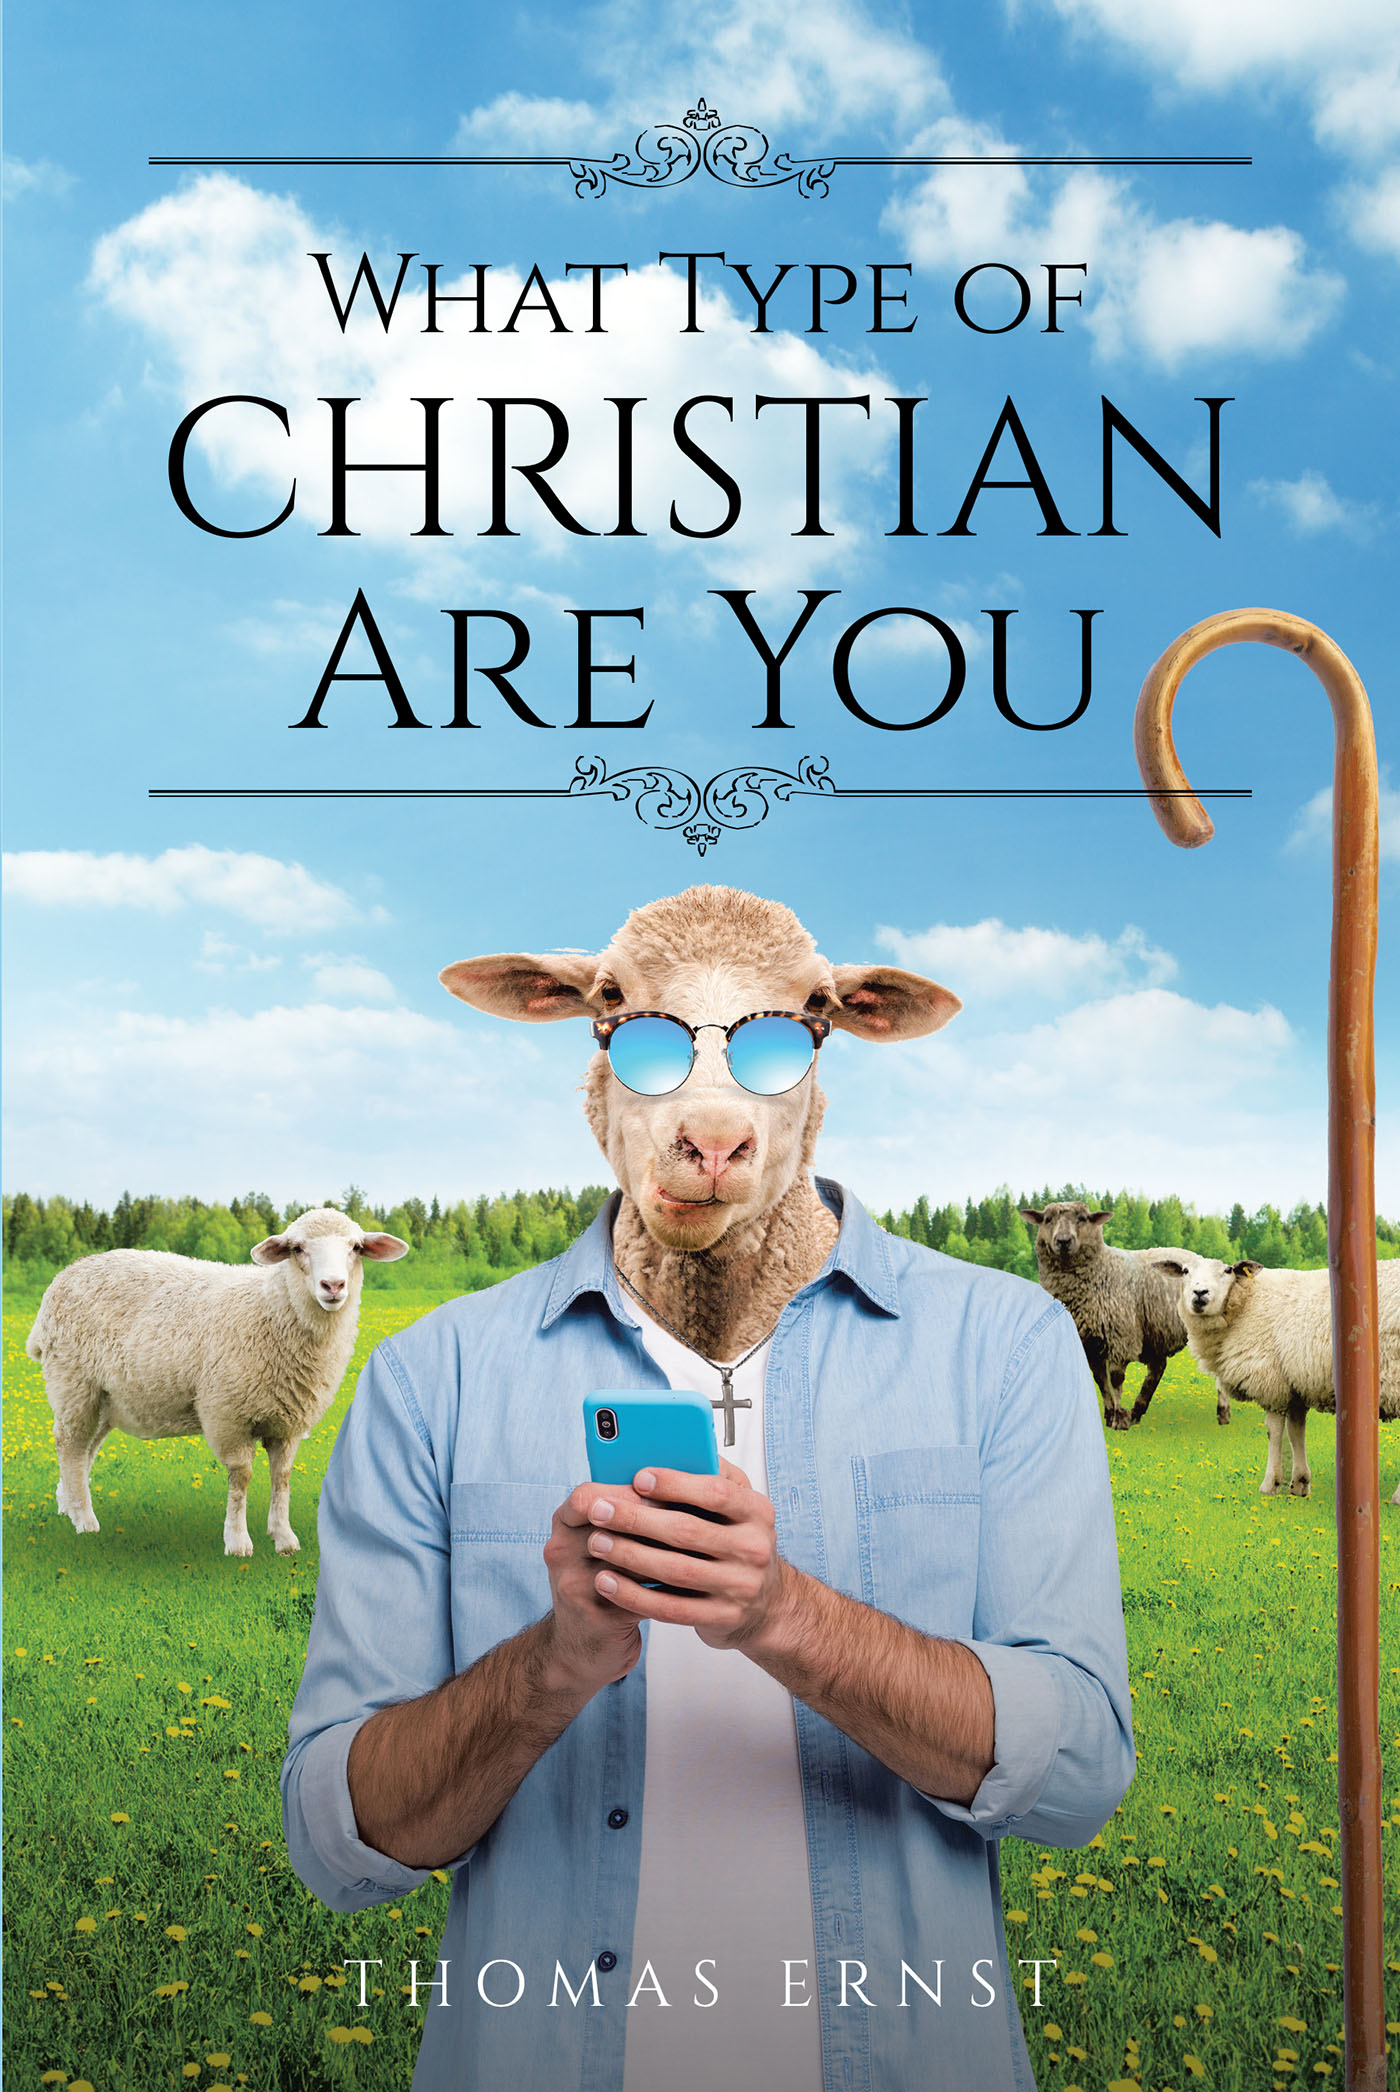 Thomas Ernst’s Newly Released "What Type of Christian Are You" is a Thoughtful Examination of How to be a Good Follower of Christ